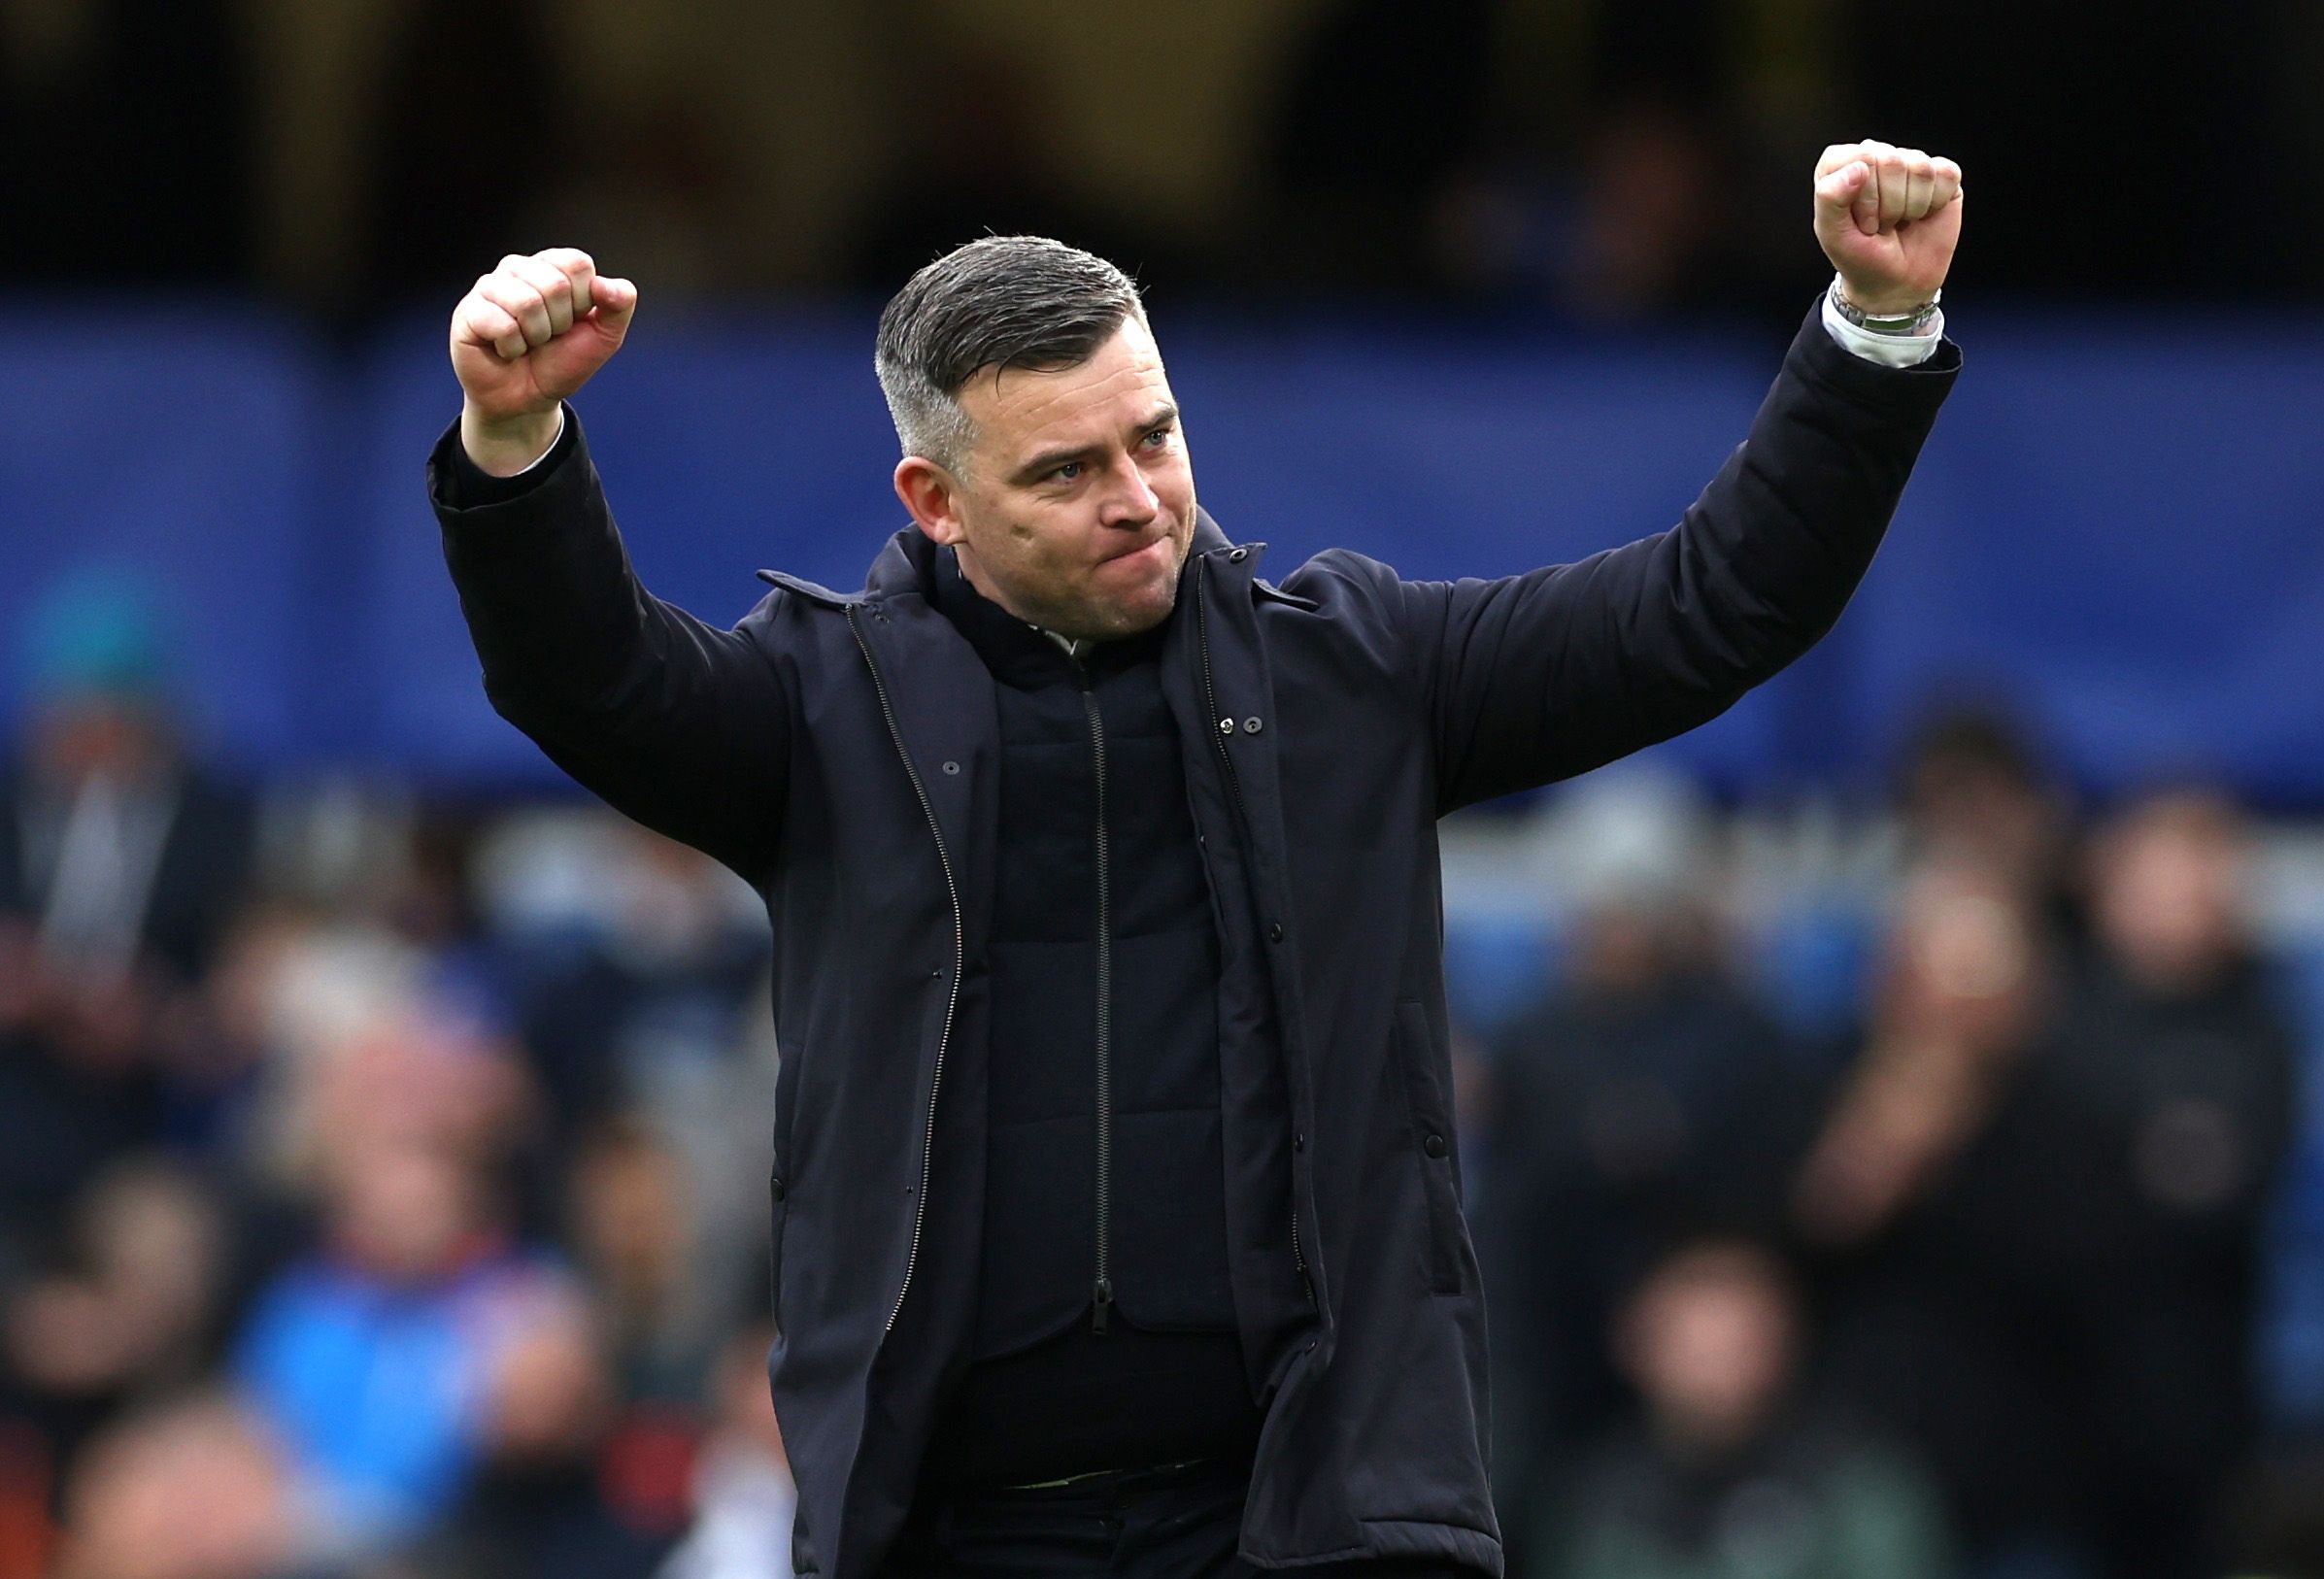 Soccer Football - FA Cup - Fourth Round - Chelsea v Plymouth Argyle - Stamford Bridge, London, Britain - February 5, 2022 Plymouth Argyle manager Steven Schumacher acknowledges fans after the match Action Images via Reuters/Paul Childs